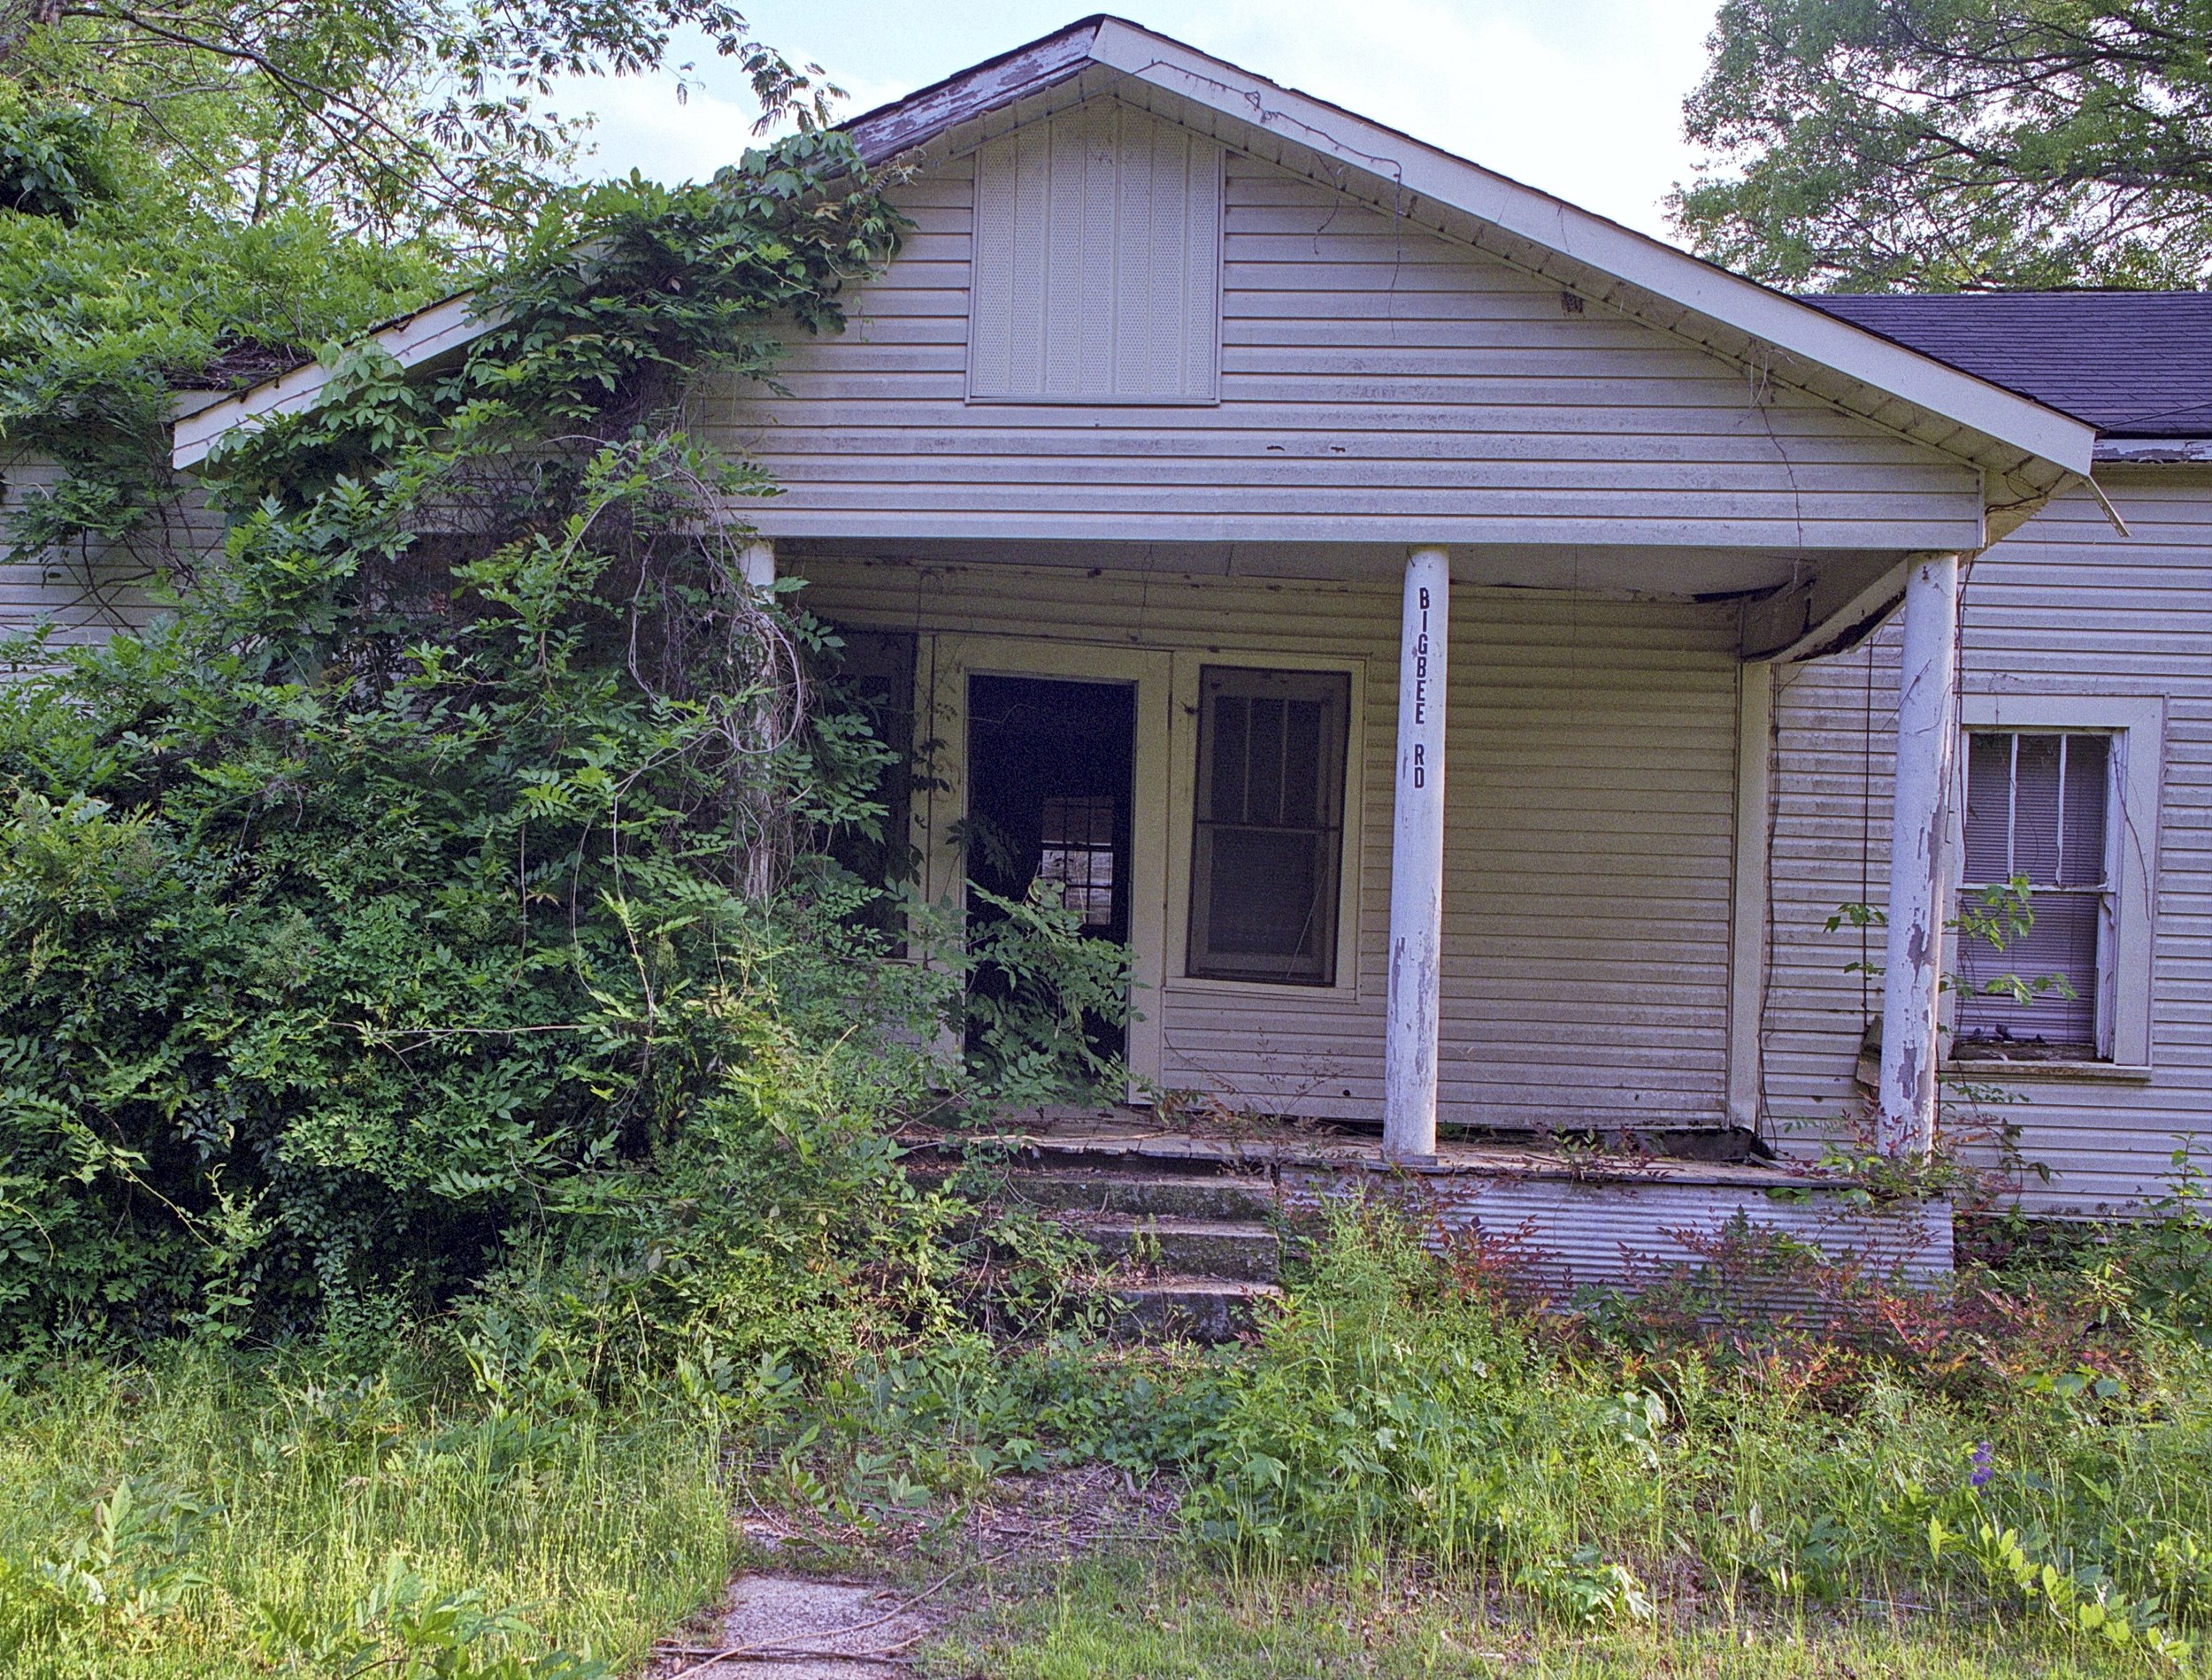  Abandoned house on Bigbee Road. &nbsp;Captured on Fujifilm Pro 400H roll film using a Pentax 645A medium format camera and 45mm f/2.8 lens 